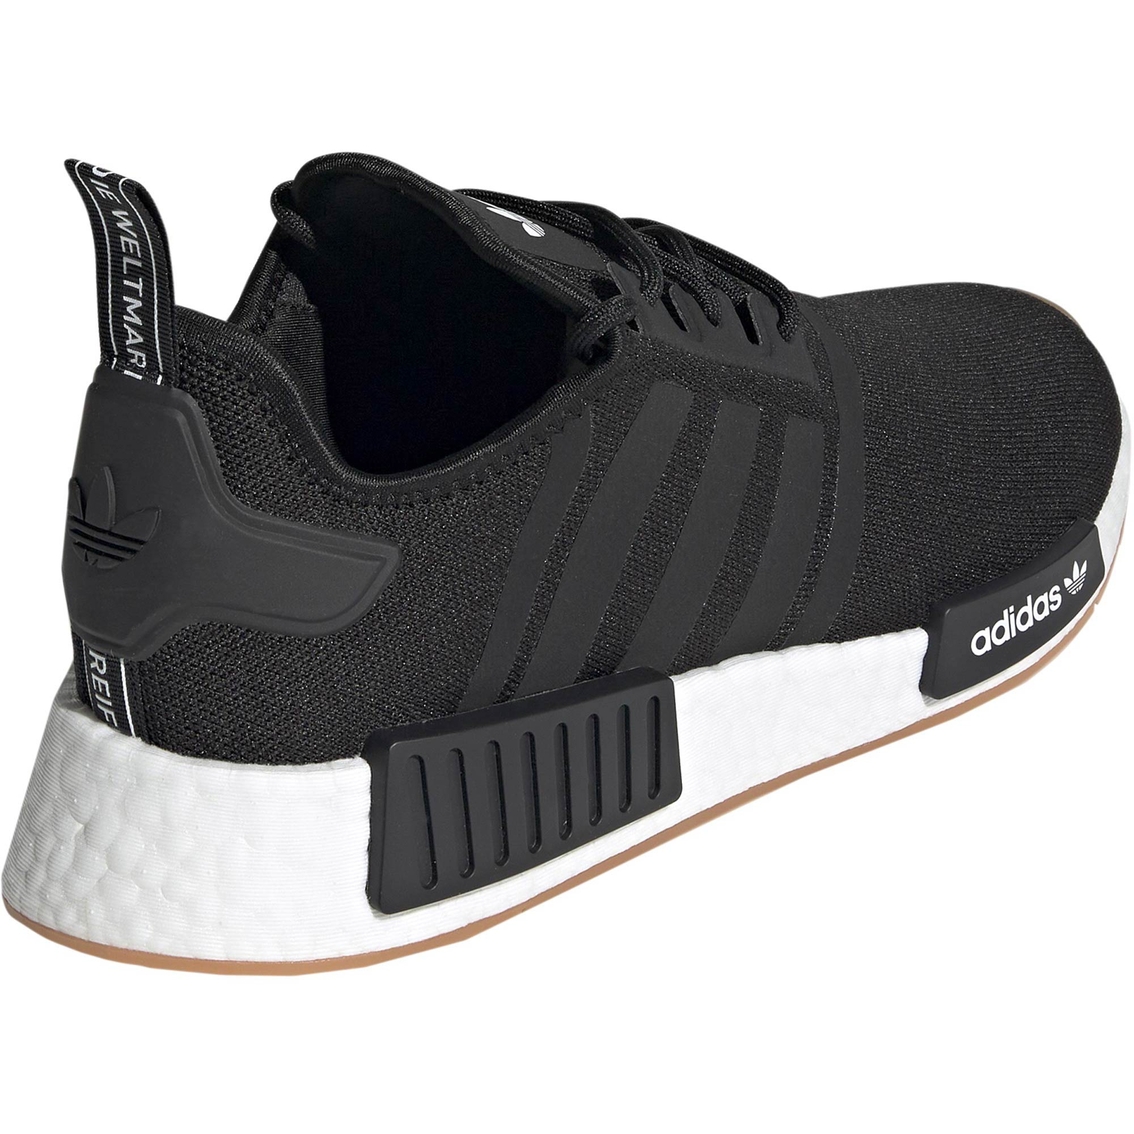 adidas Men's NMD R1 Sneakers - Image 7 of 8